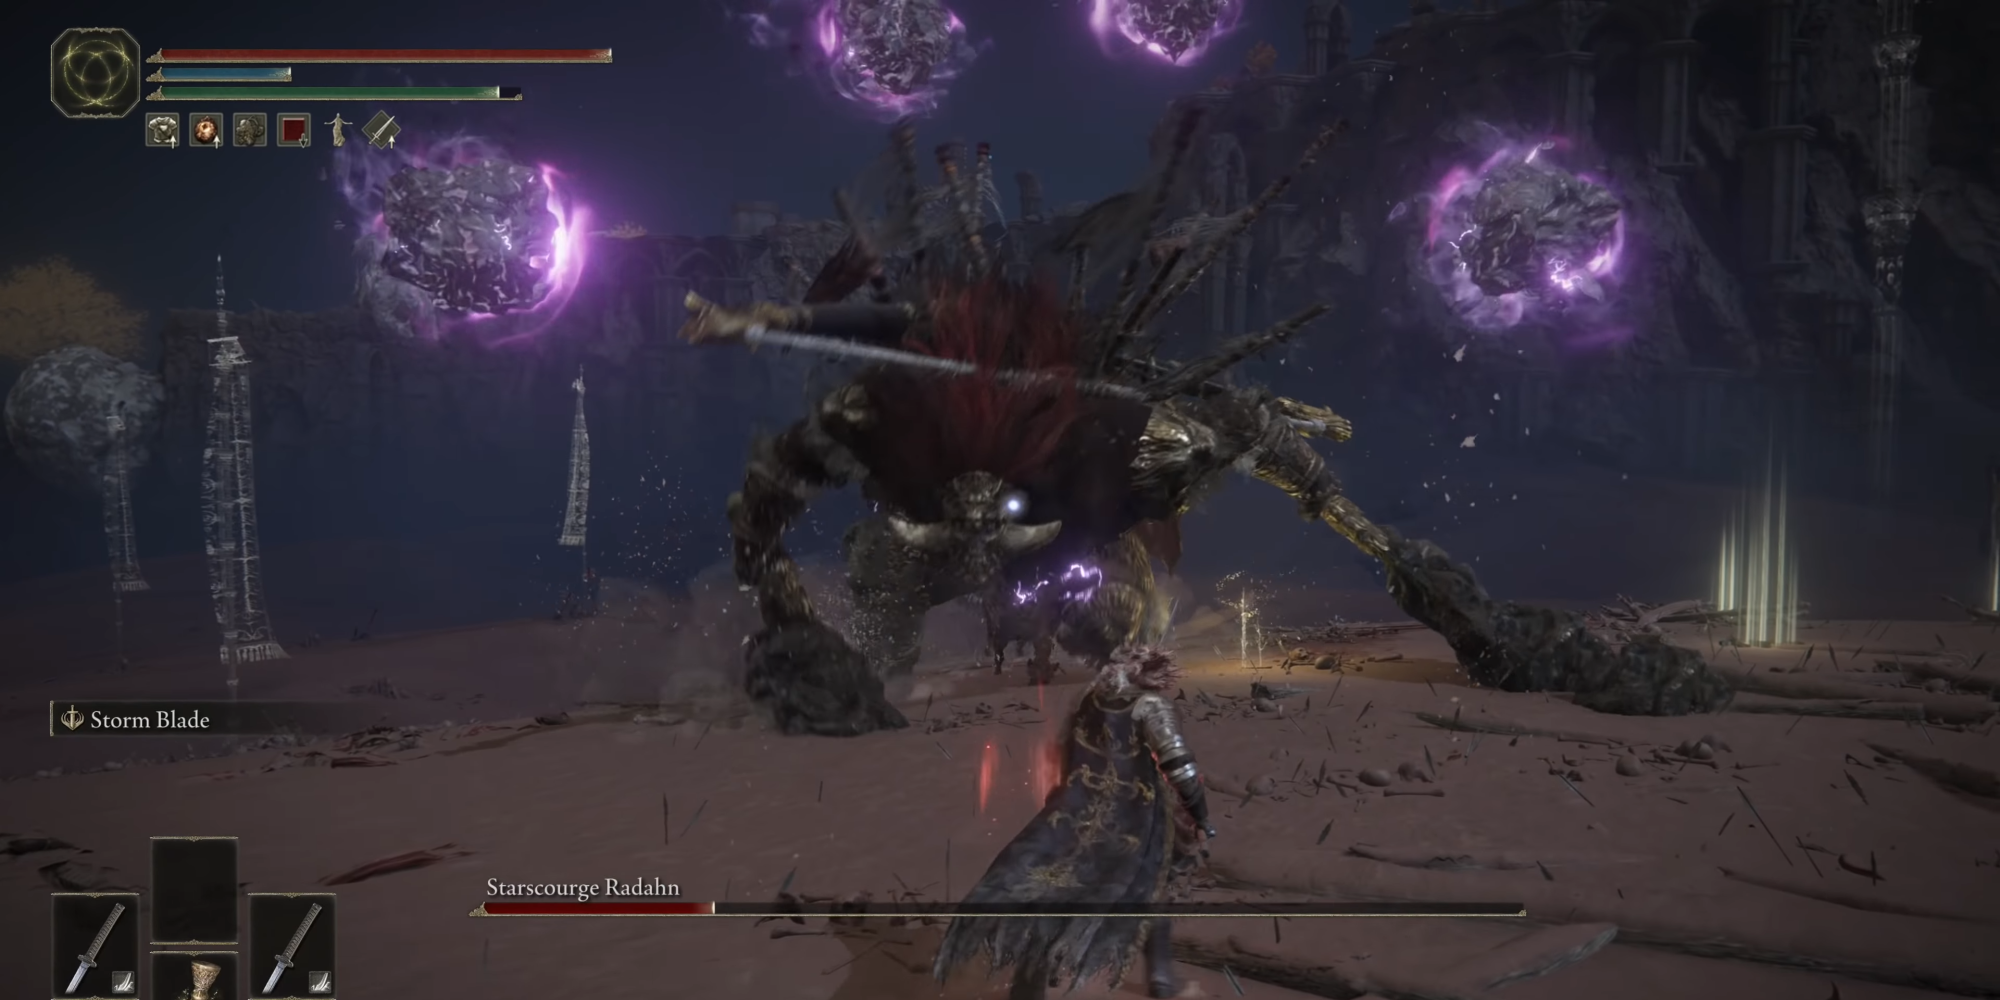 This image shows Starscourge Radahn using his gravity defense attack in Elden Ring.